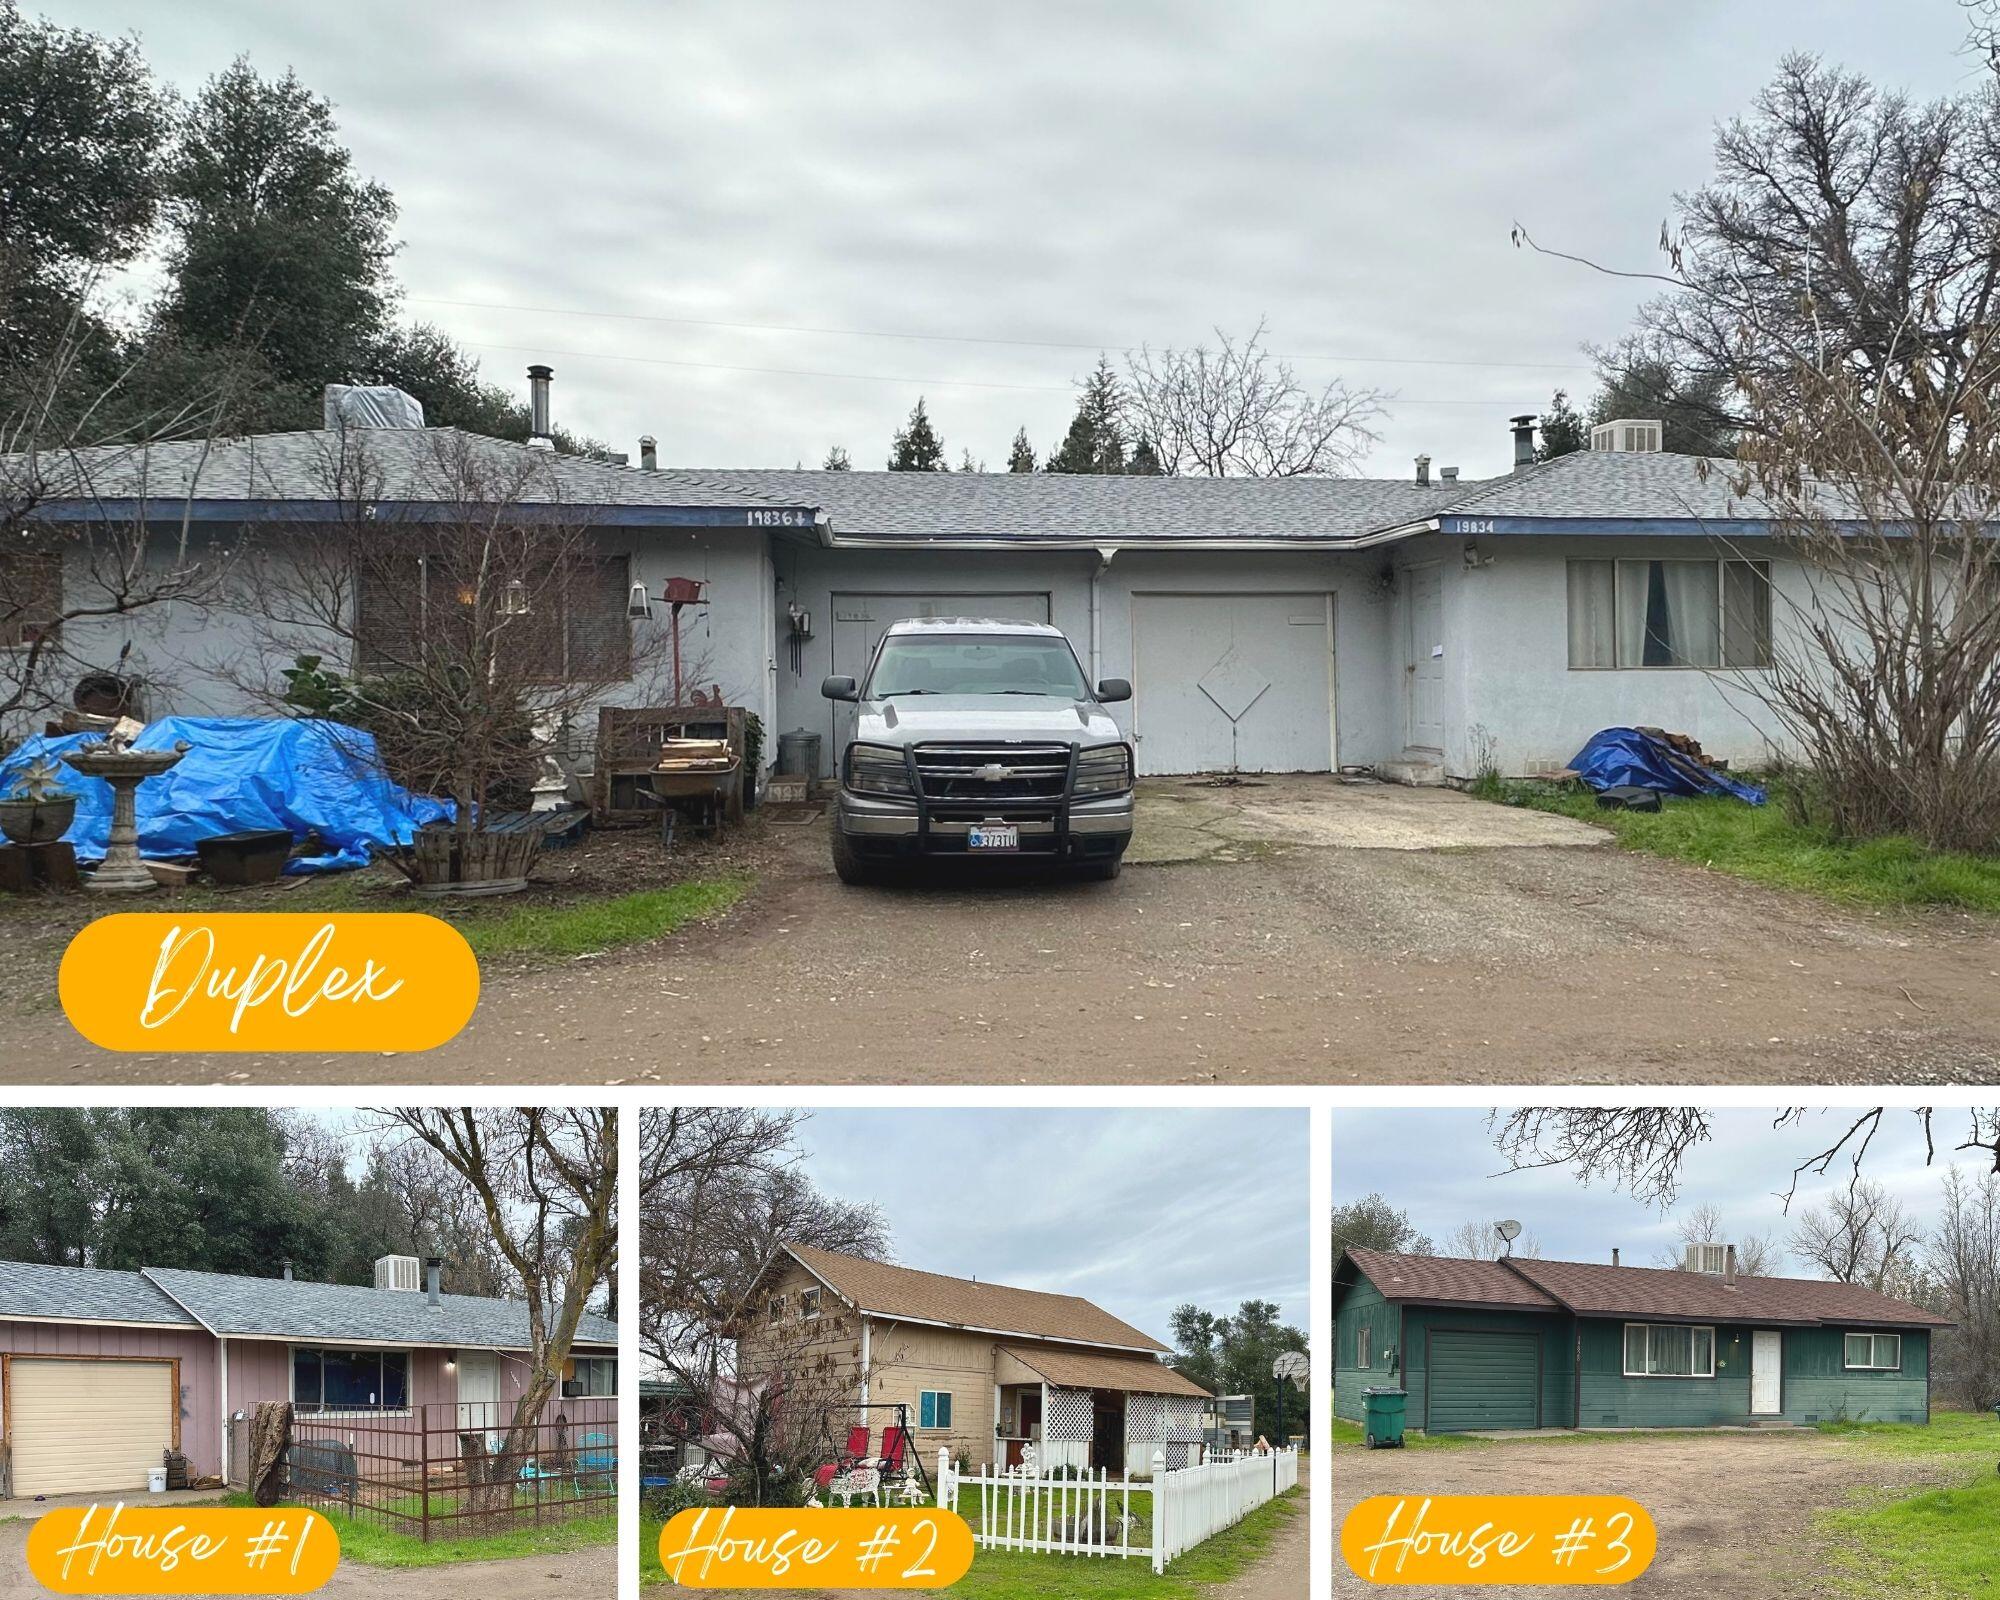 Property: 19838 First St,Cottonwood, CA